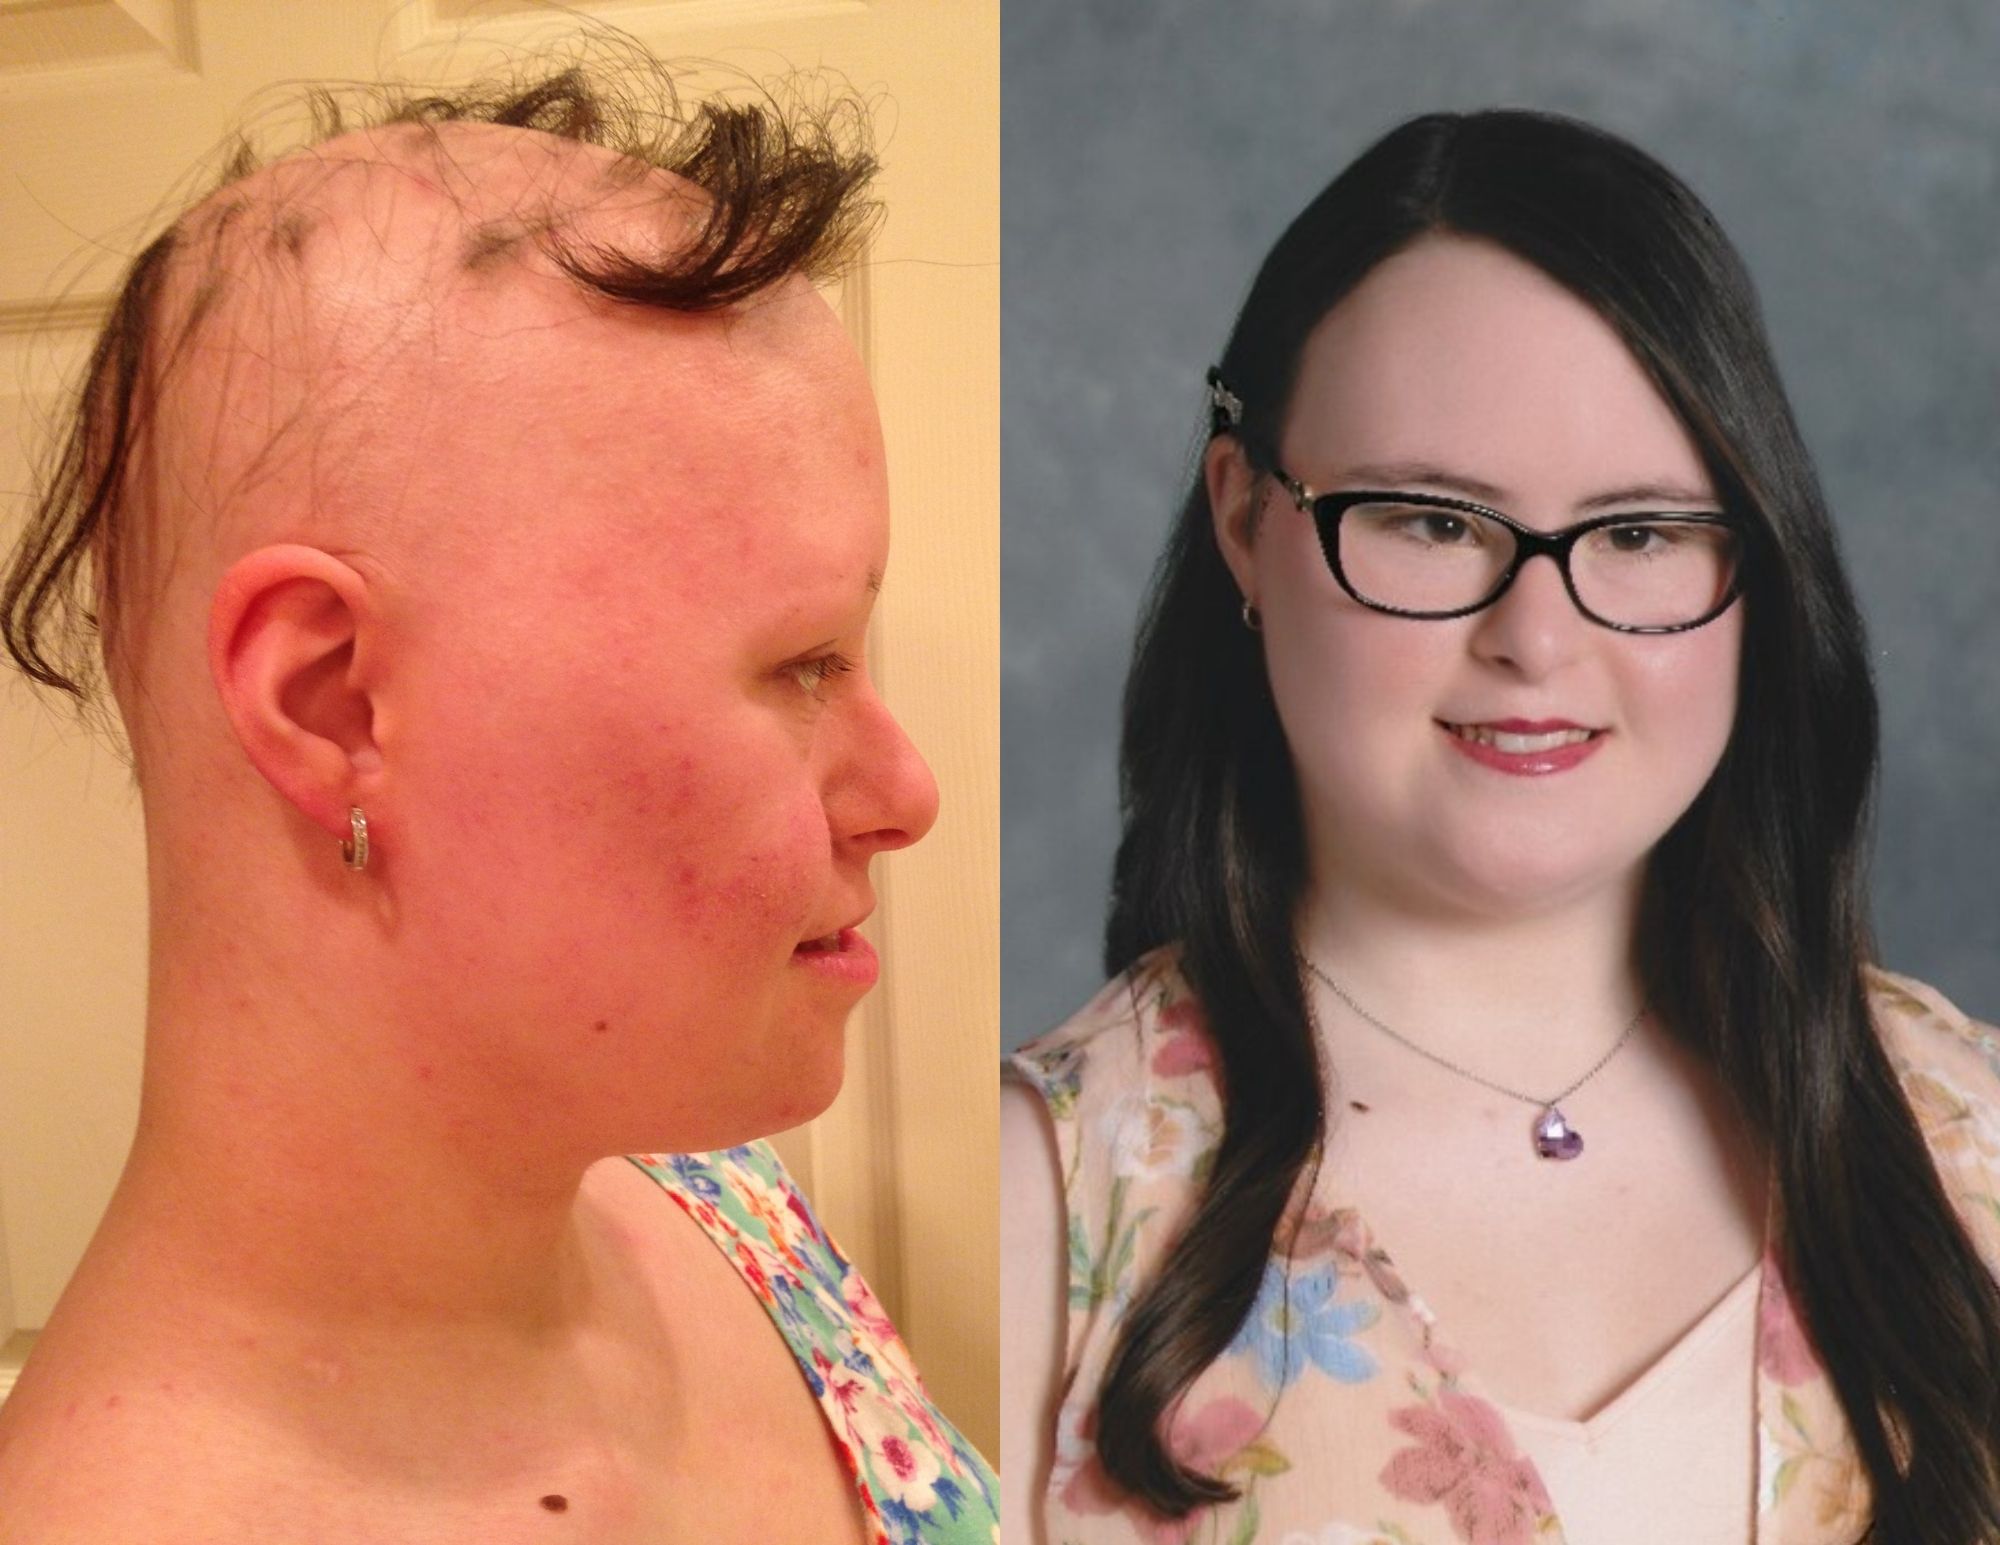 Jessica Rotolo before and after drug trial for alopecia areata